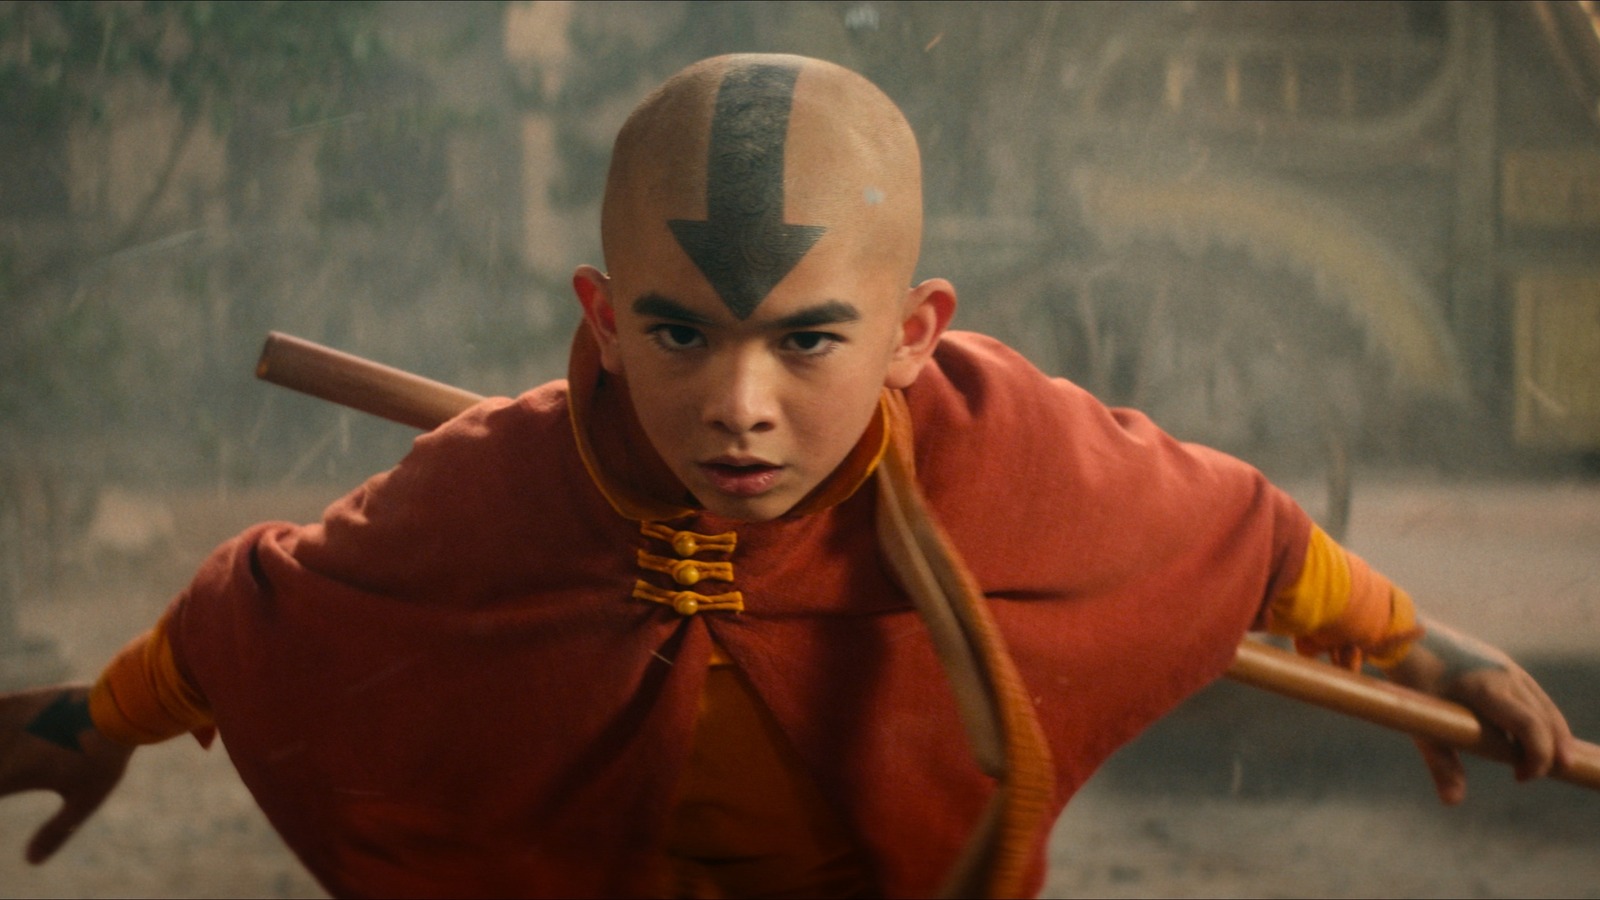 avatar the last airbender live action movie review